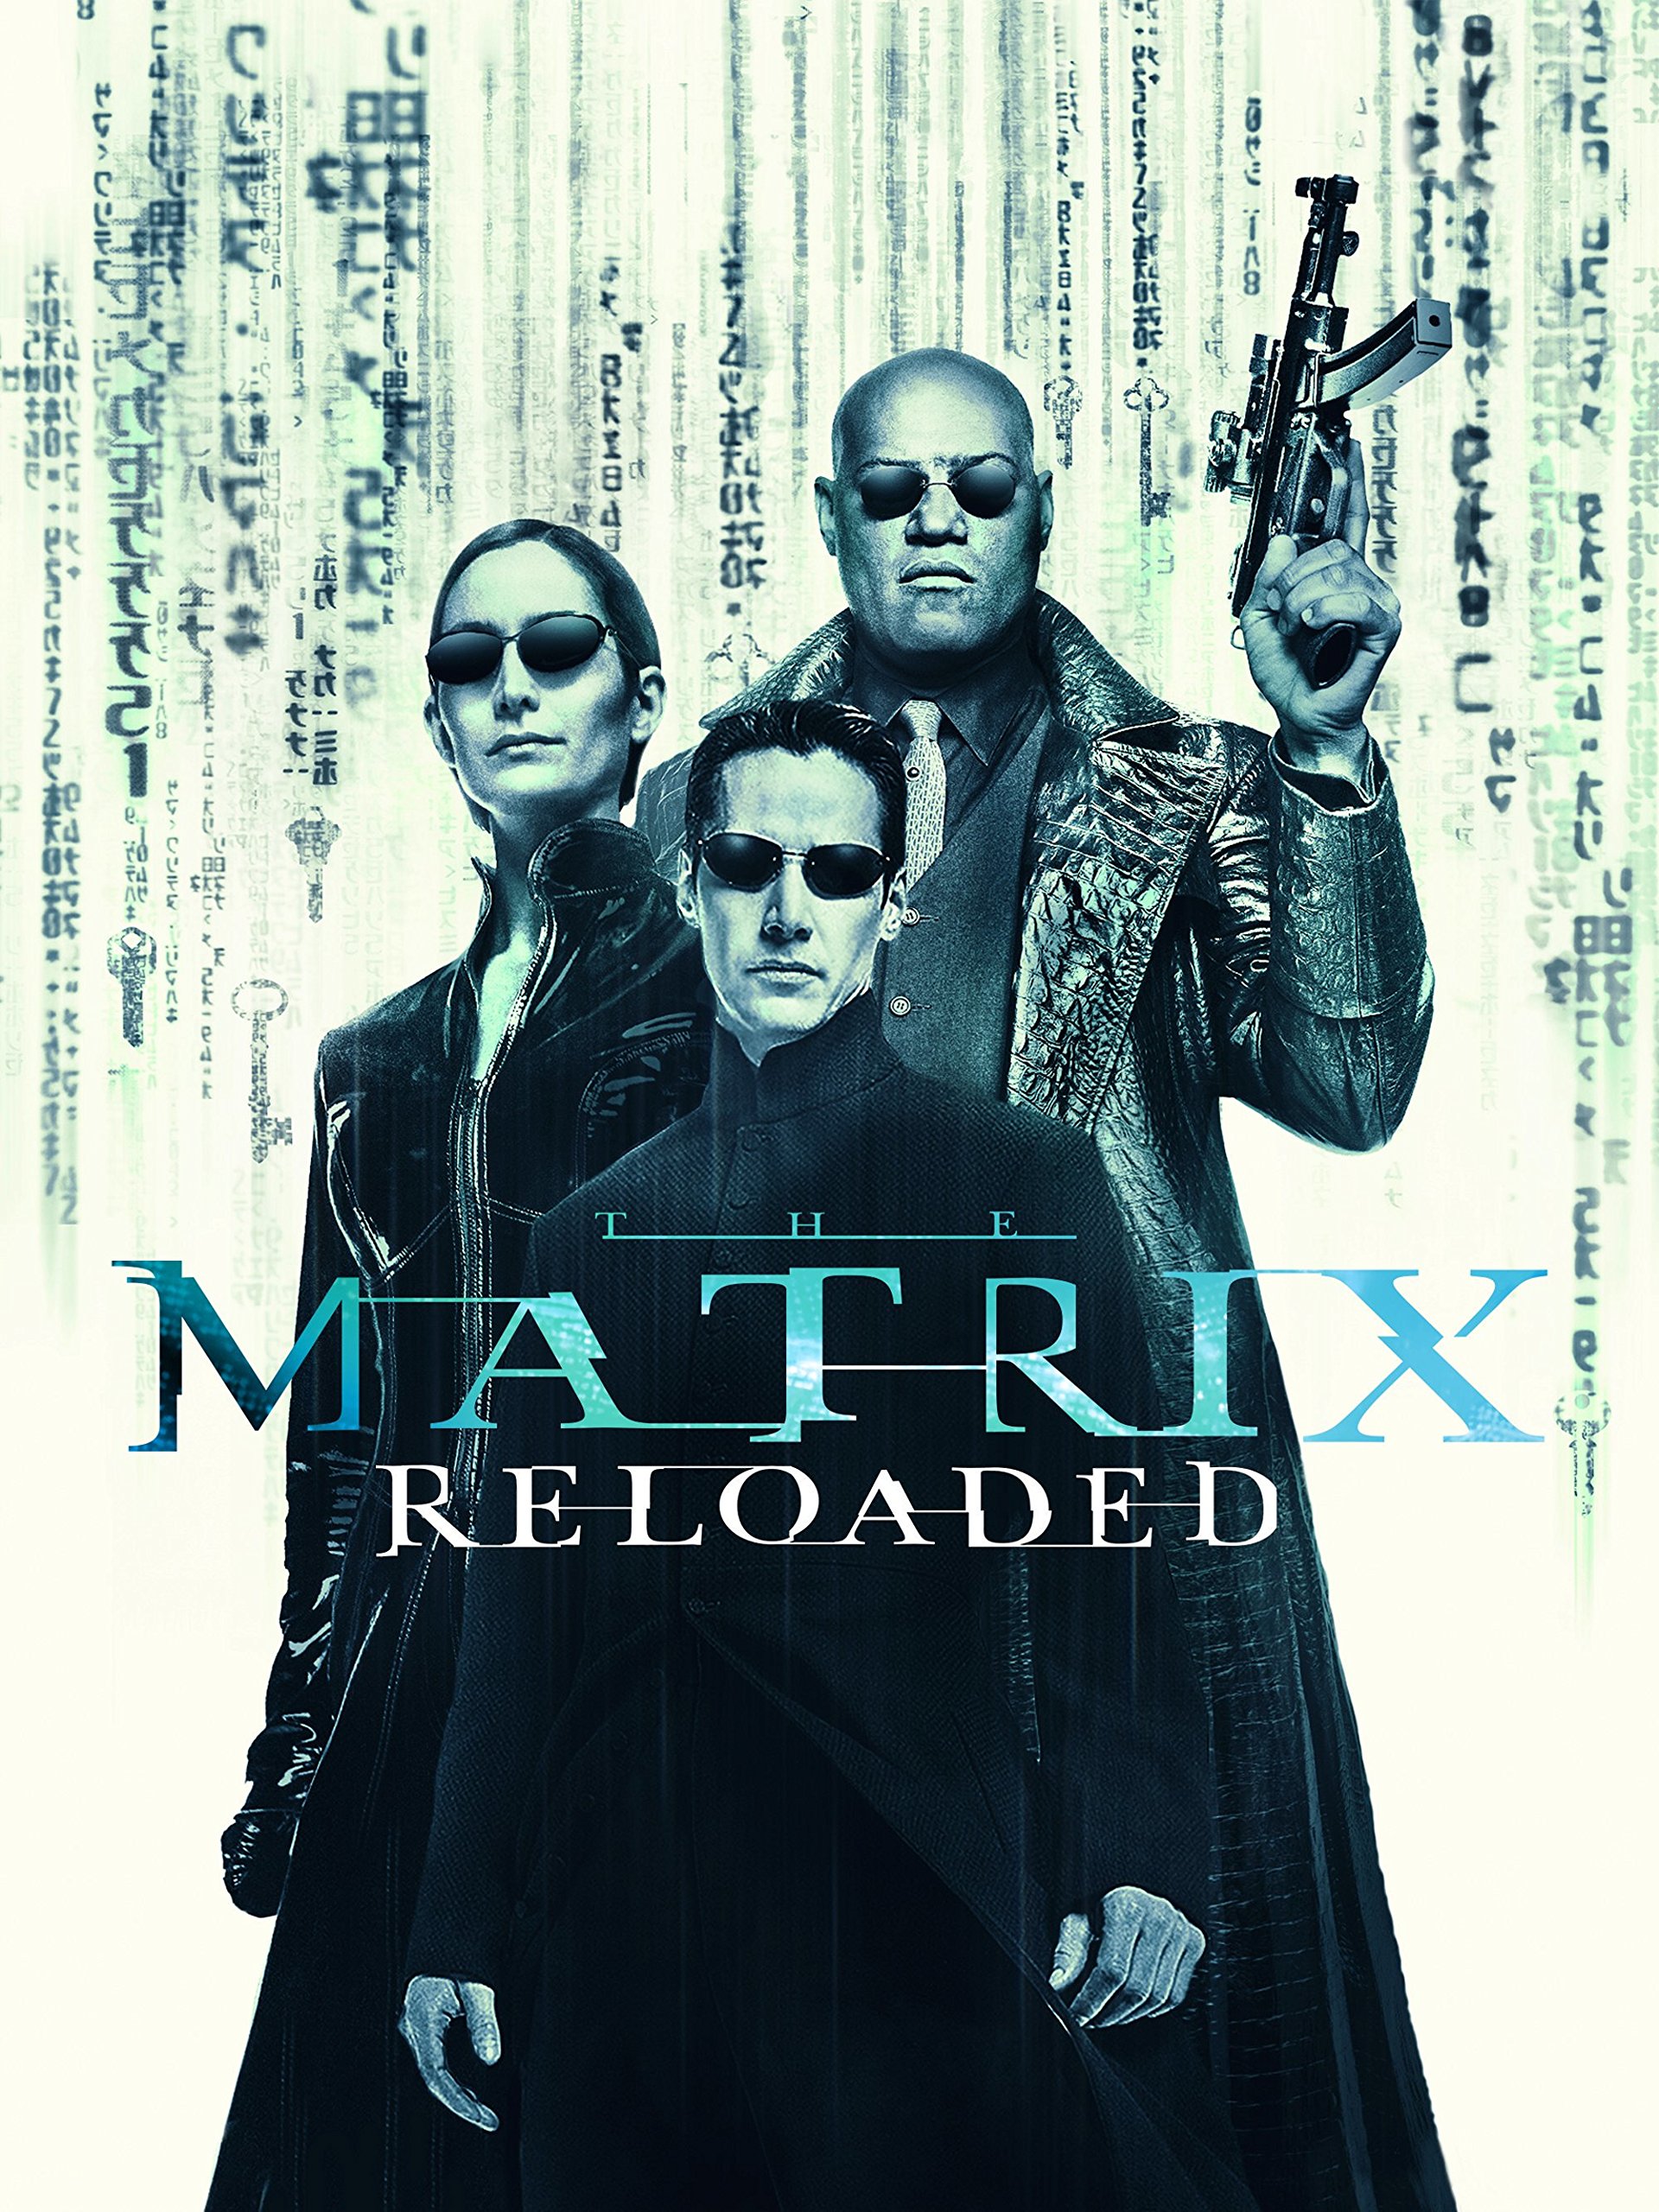 https://static.wikia.nocookie.net/matrix/images/5/5a/The_Matrix_Reloaded_digital_release_cover.jpg/revision/latest?cb=20210908111326